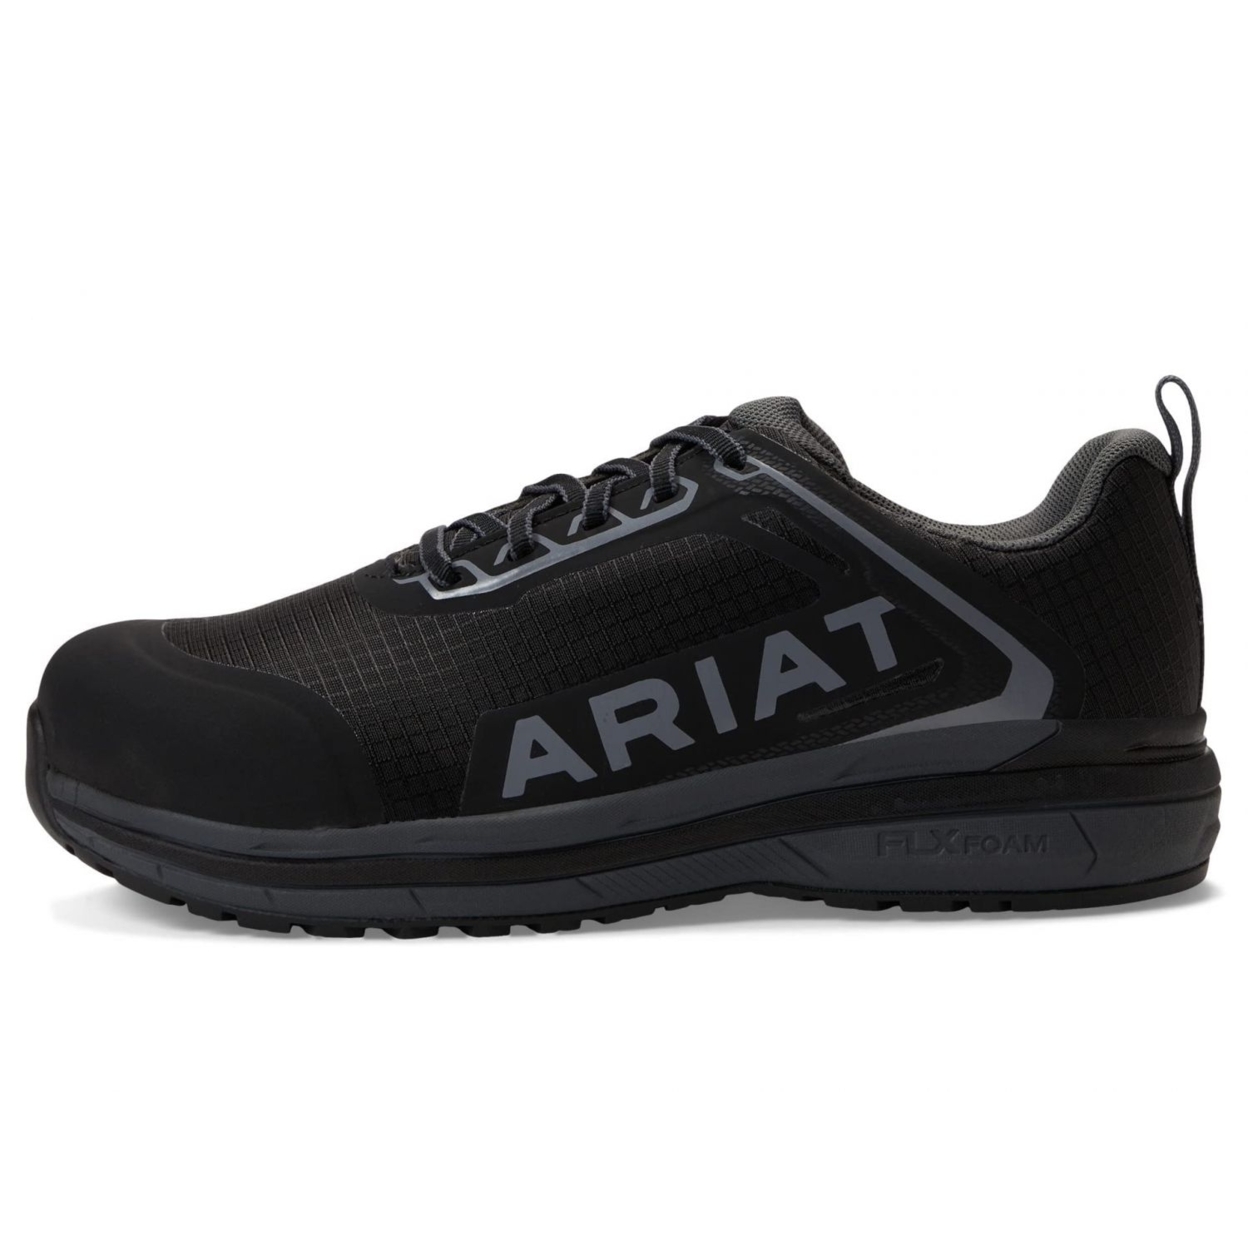 ARIAT Women's Outpace Composite Toe Safety Shoe Fire ONE SIZE BLACK - BLACK, 11